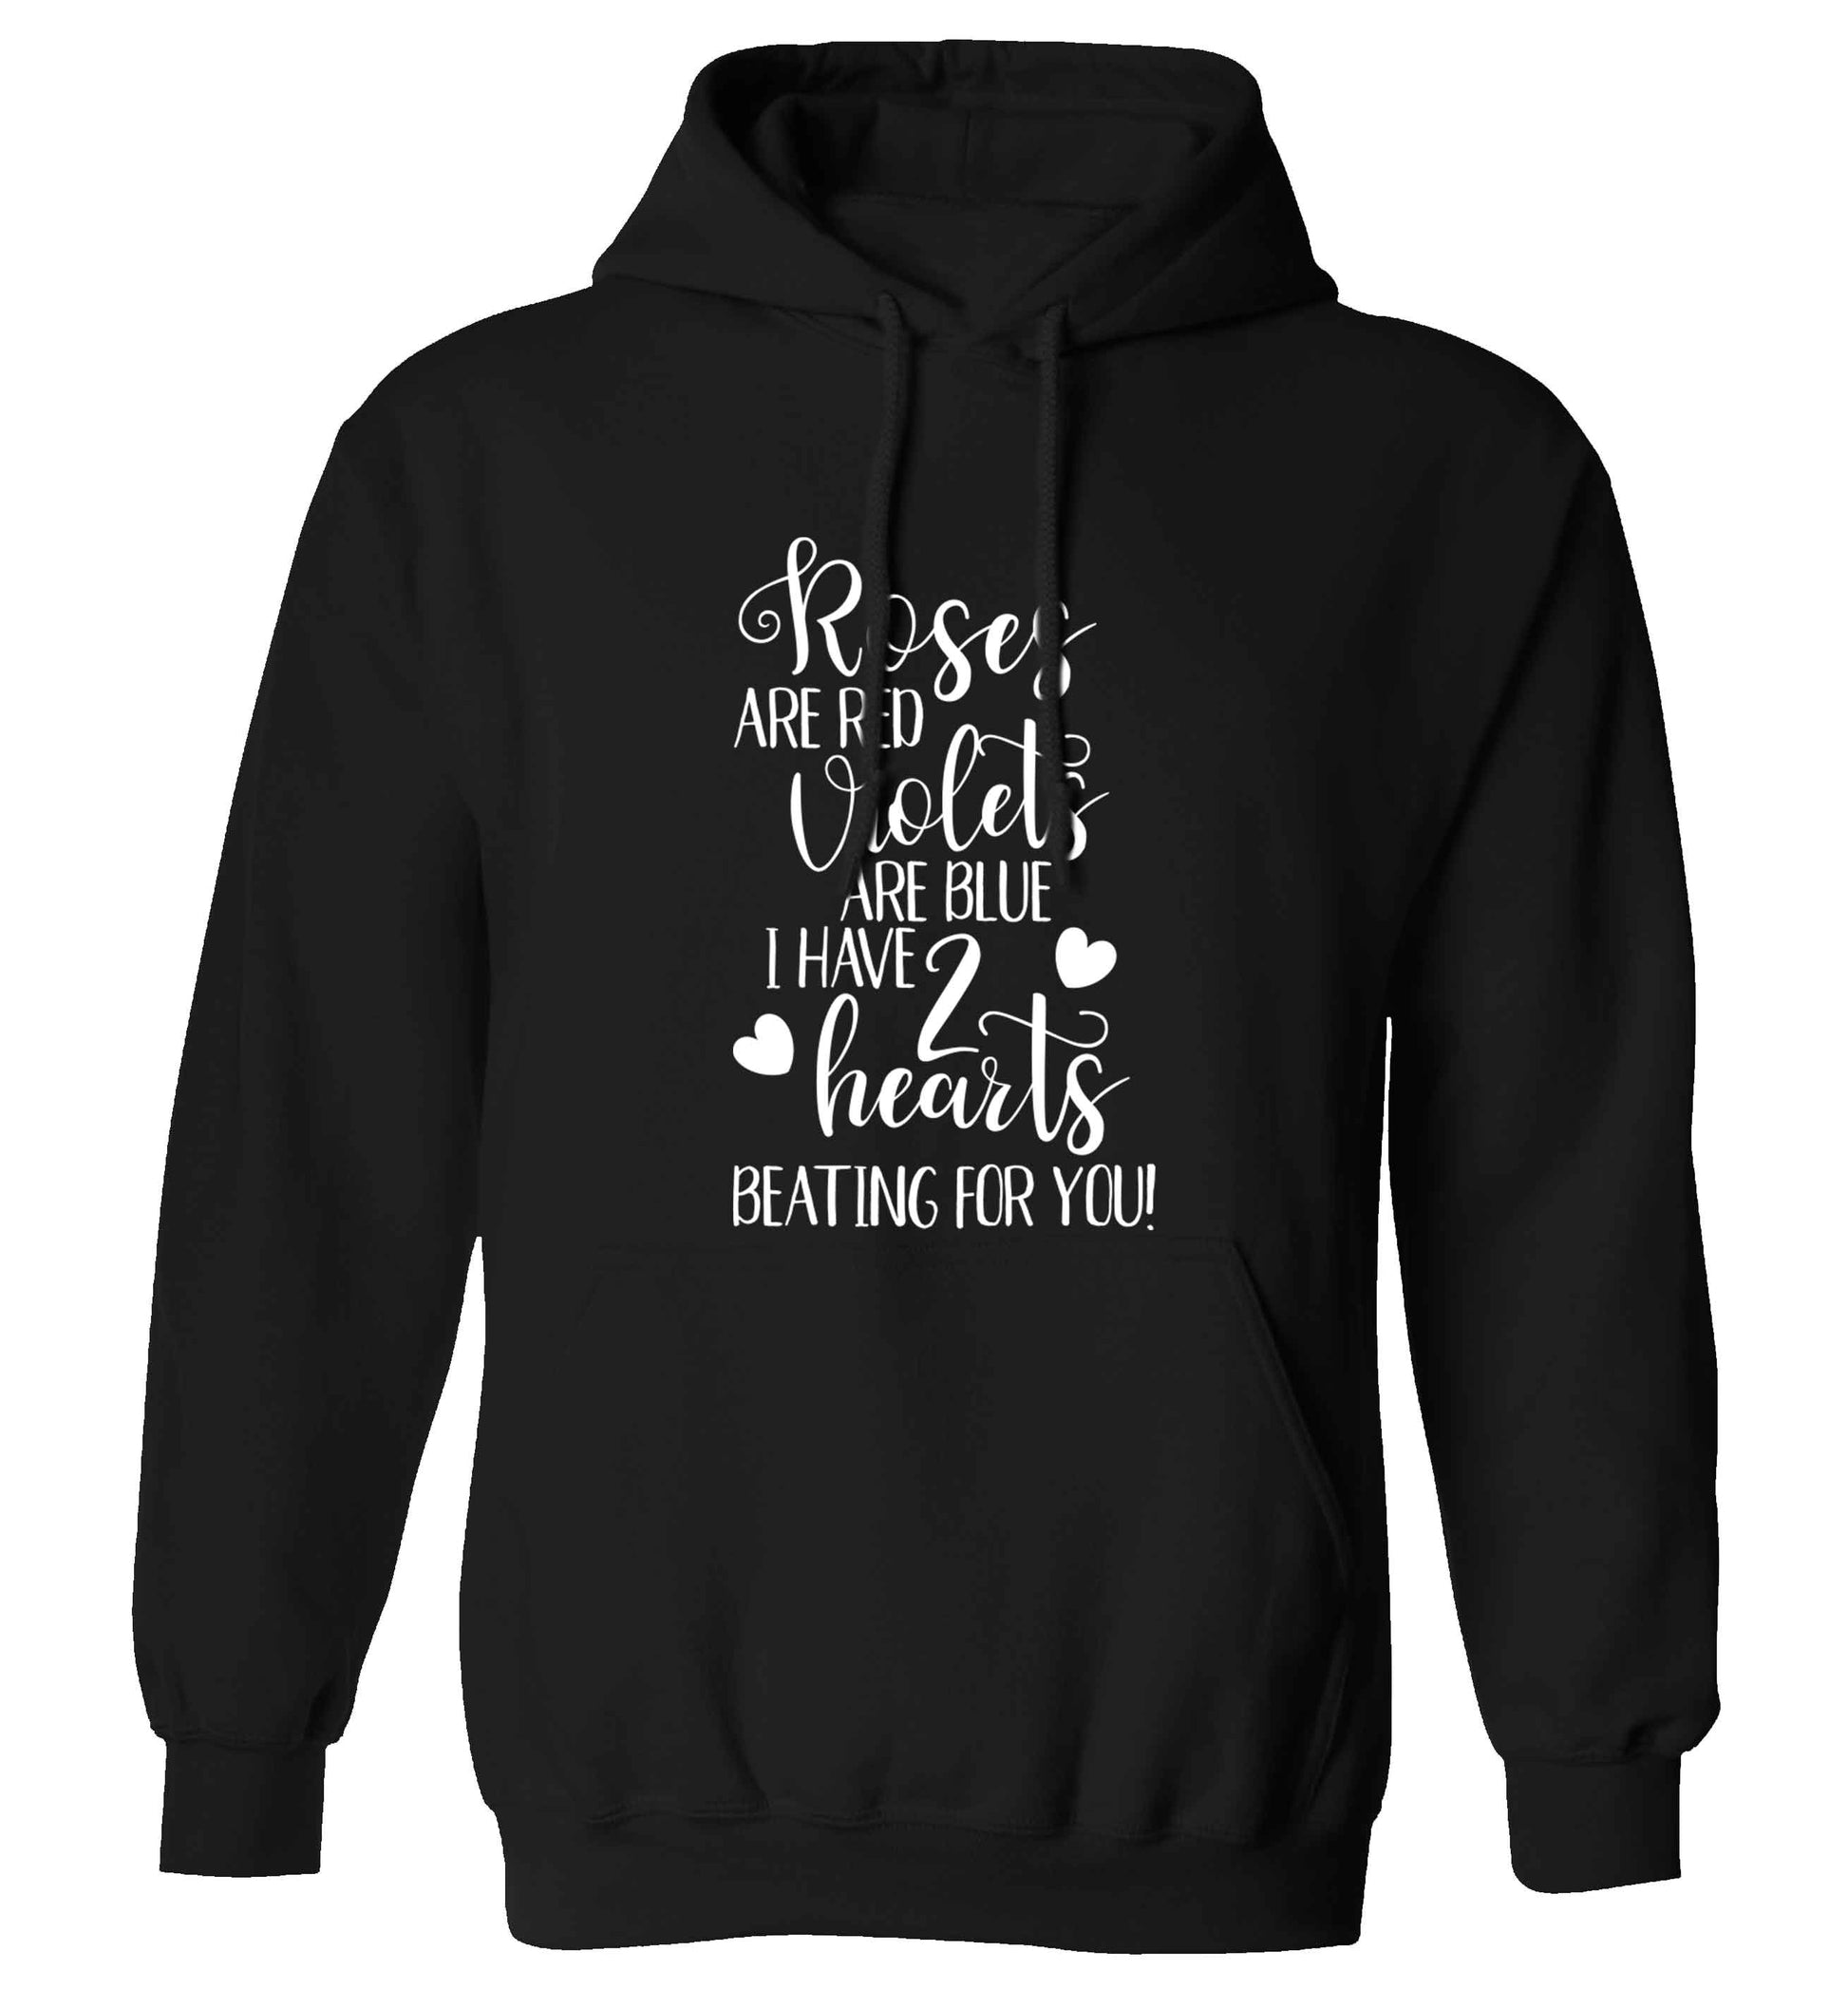 Roses are red violets are blue I have two hearts beating for you adults unisex black hoodie 2XL